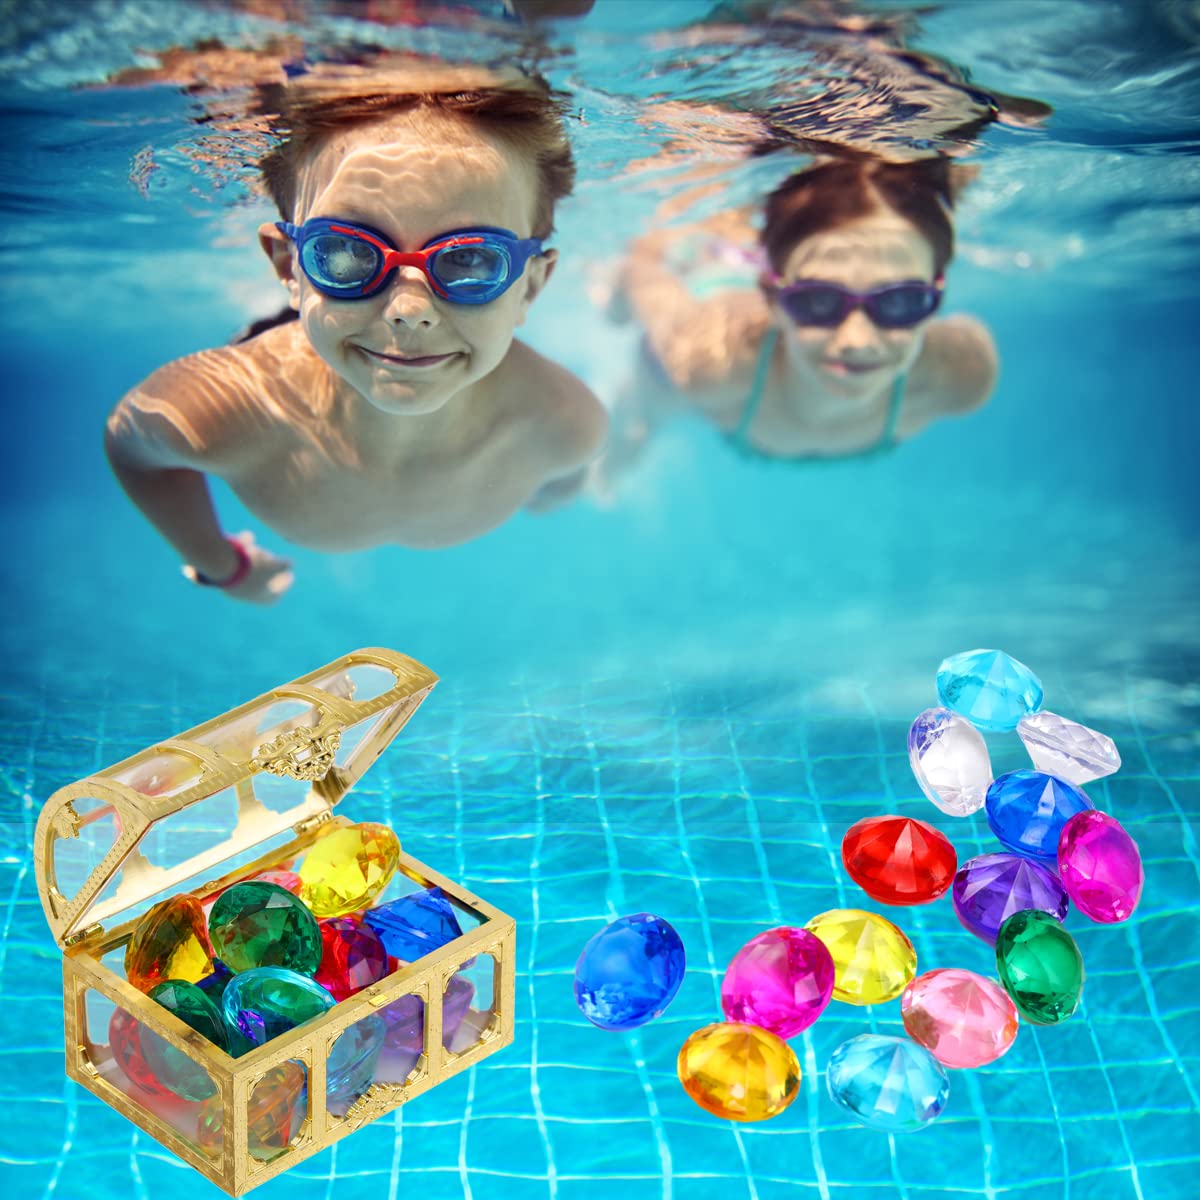 XIJUAN Diving gem Pool Toys Sand Toys,14 Color Diamond Treasure Chest Summer Swimming gems Pirate Diving Toy Set Underwater Swimming toyChildren's Game Gifts for Boys and Girls (Golden)